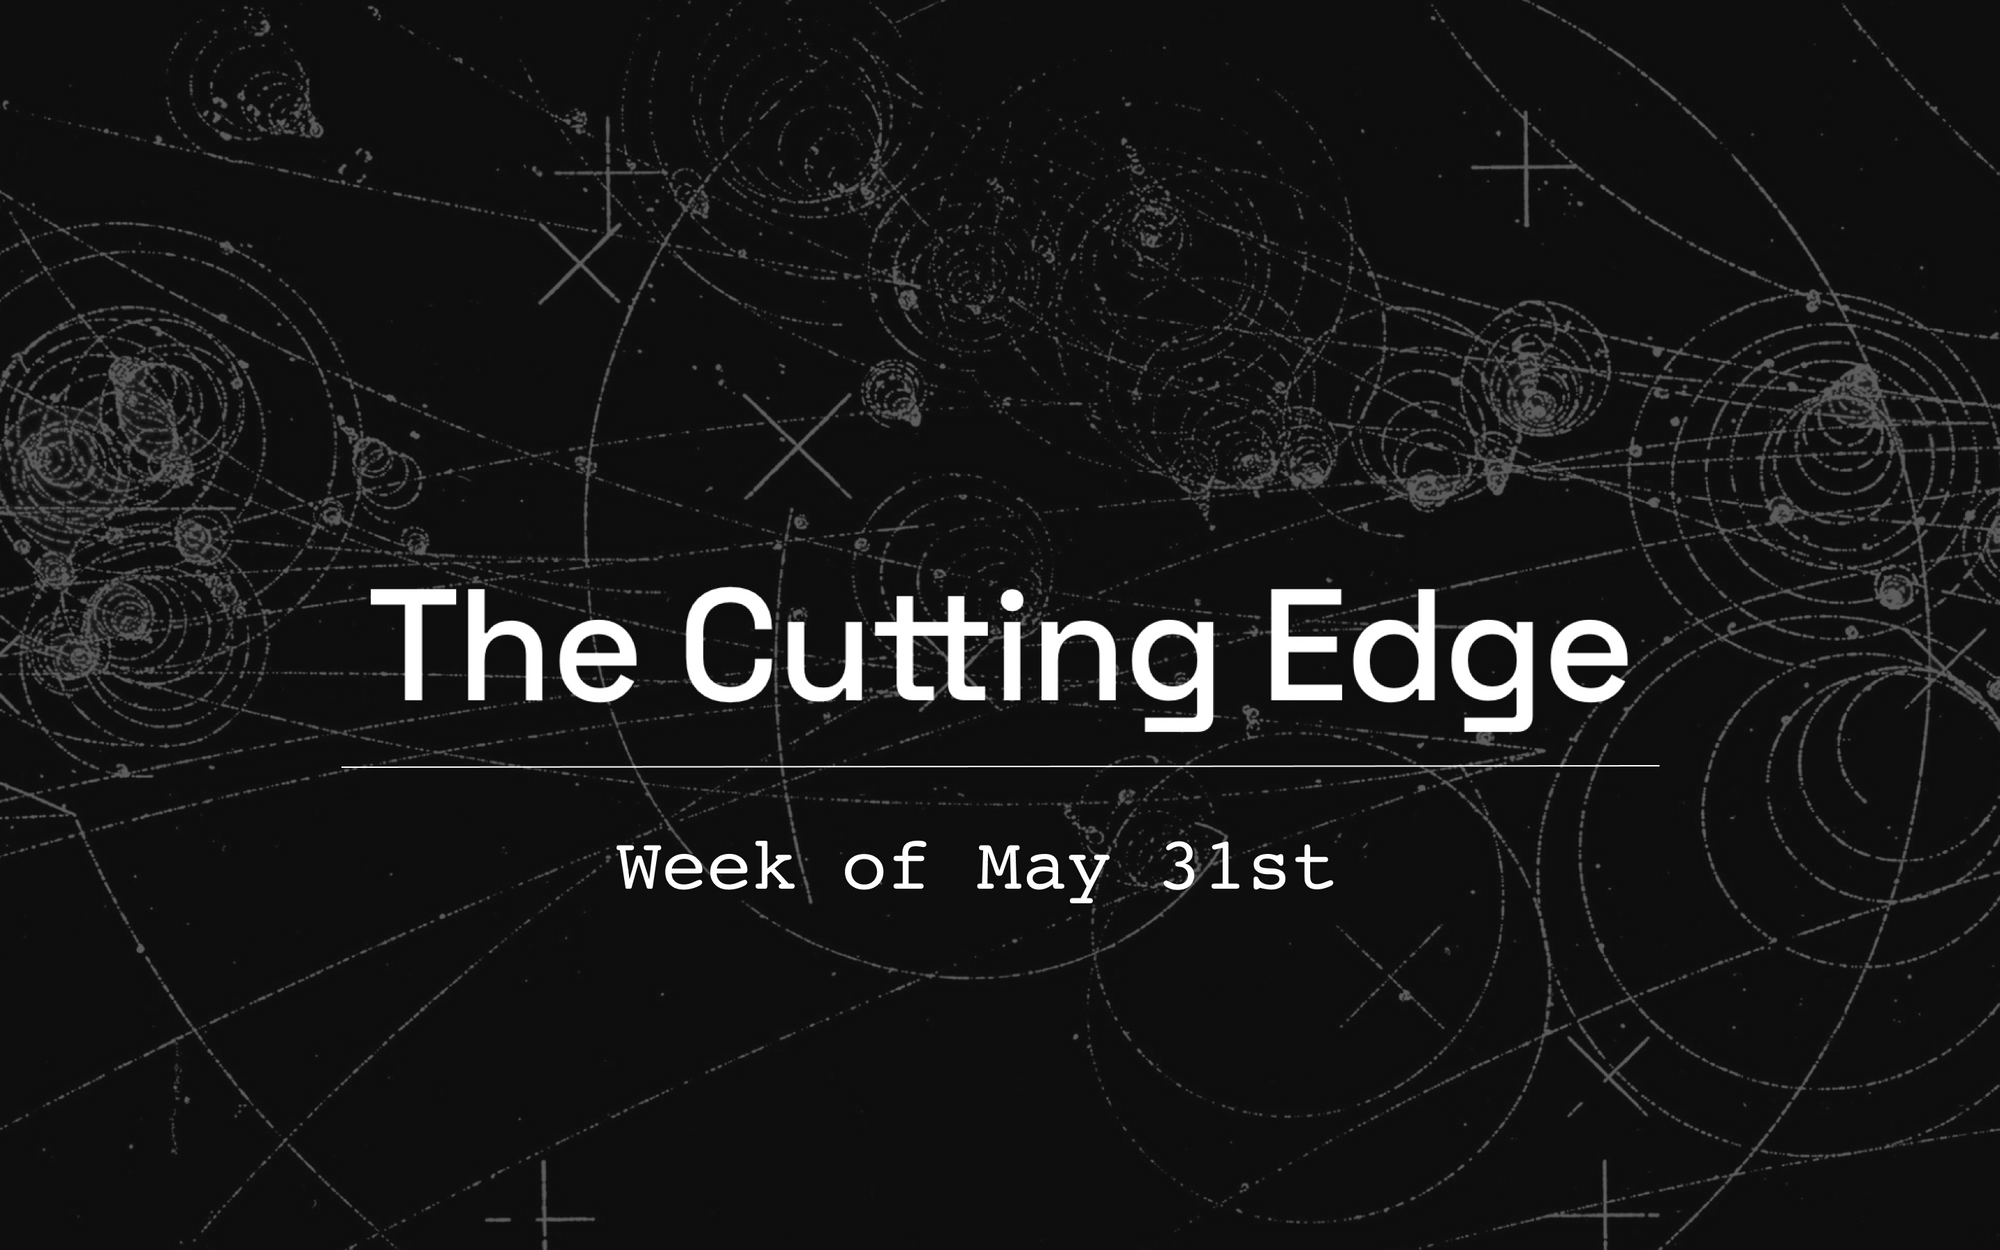 The Cutting Edge: Week of May 31st